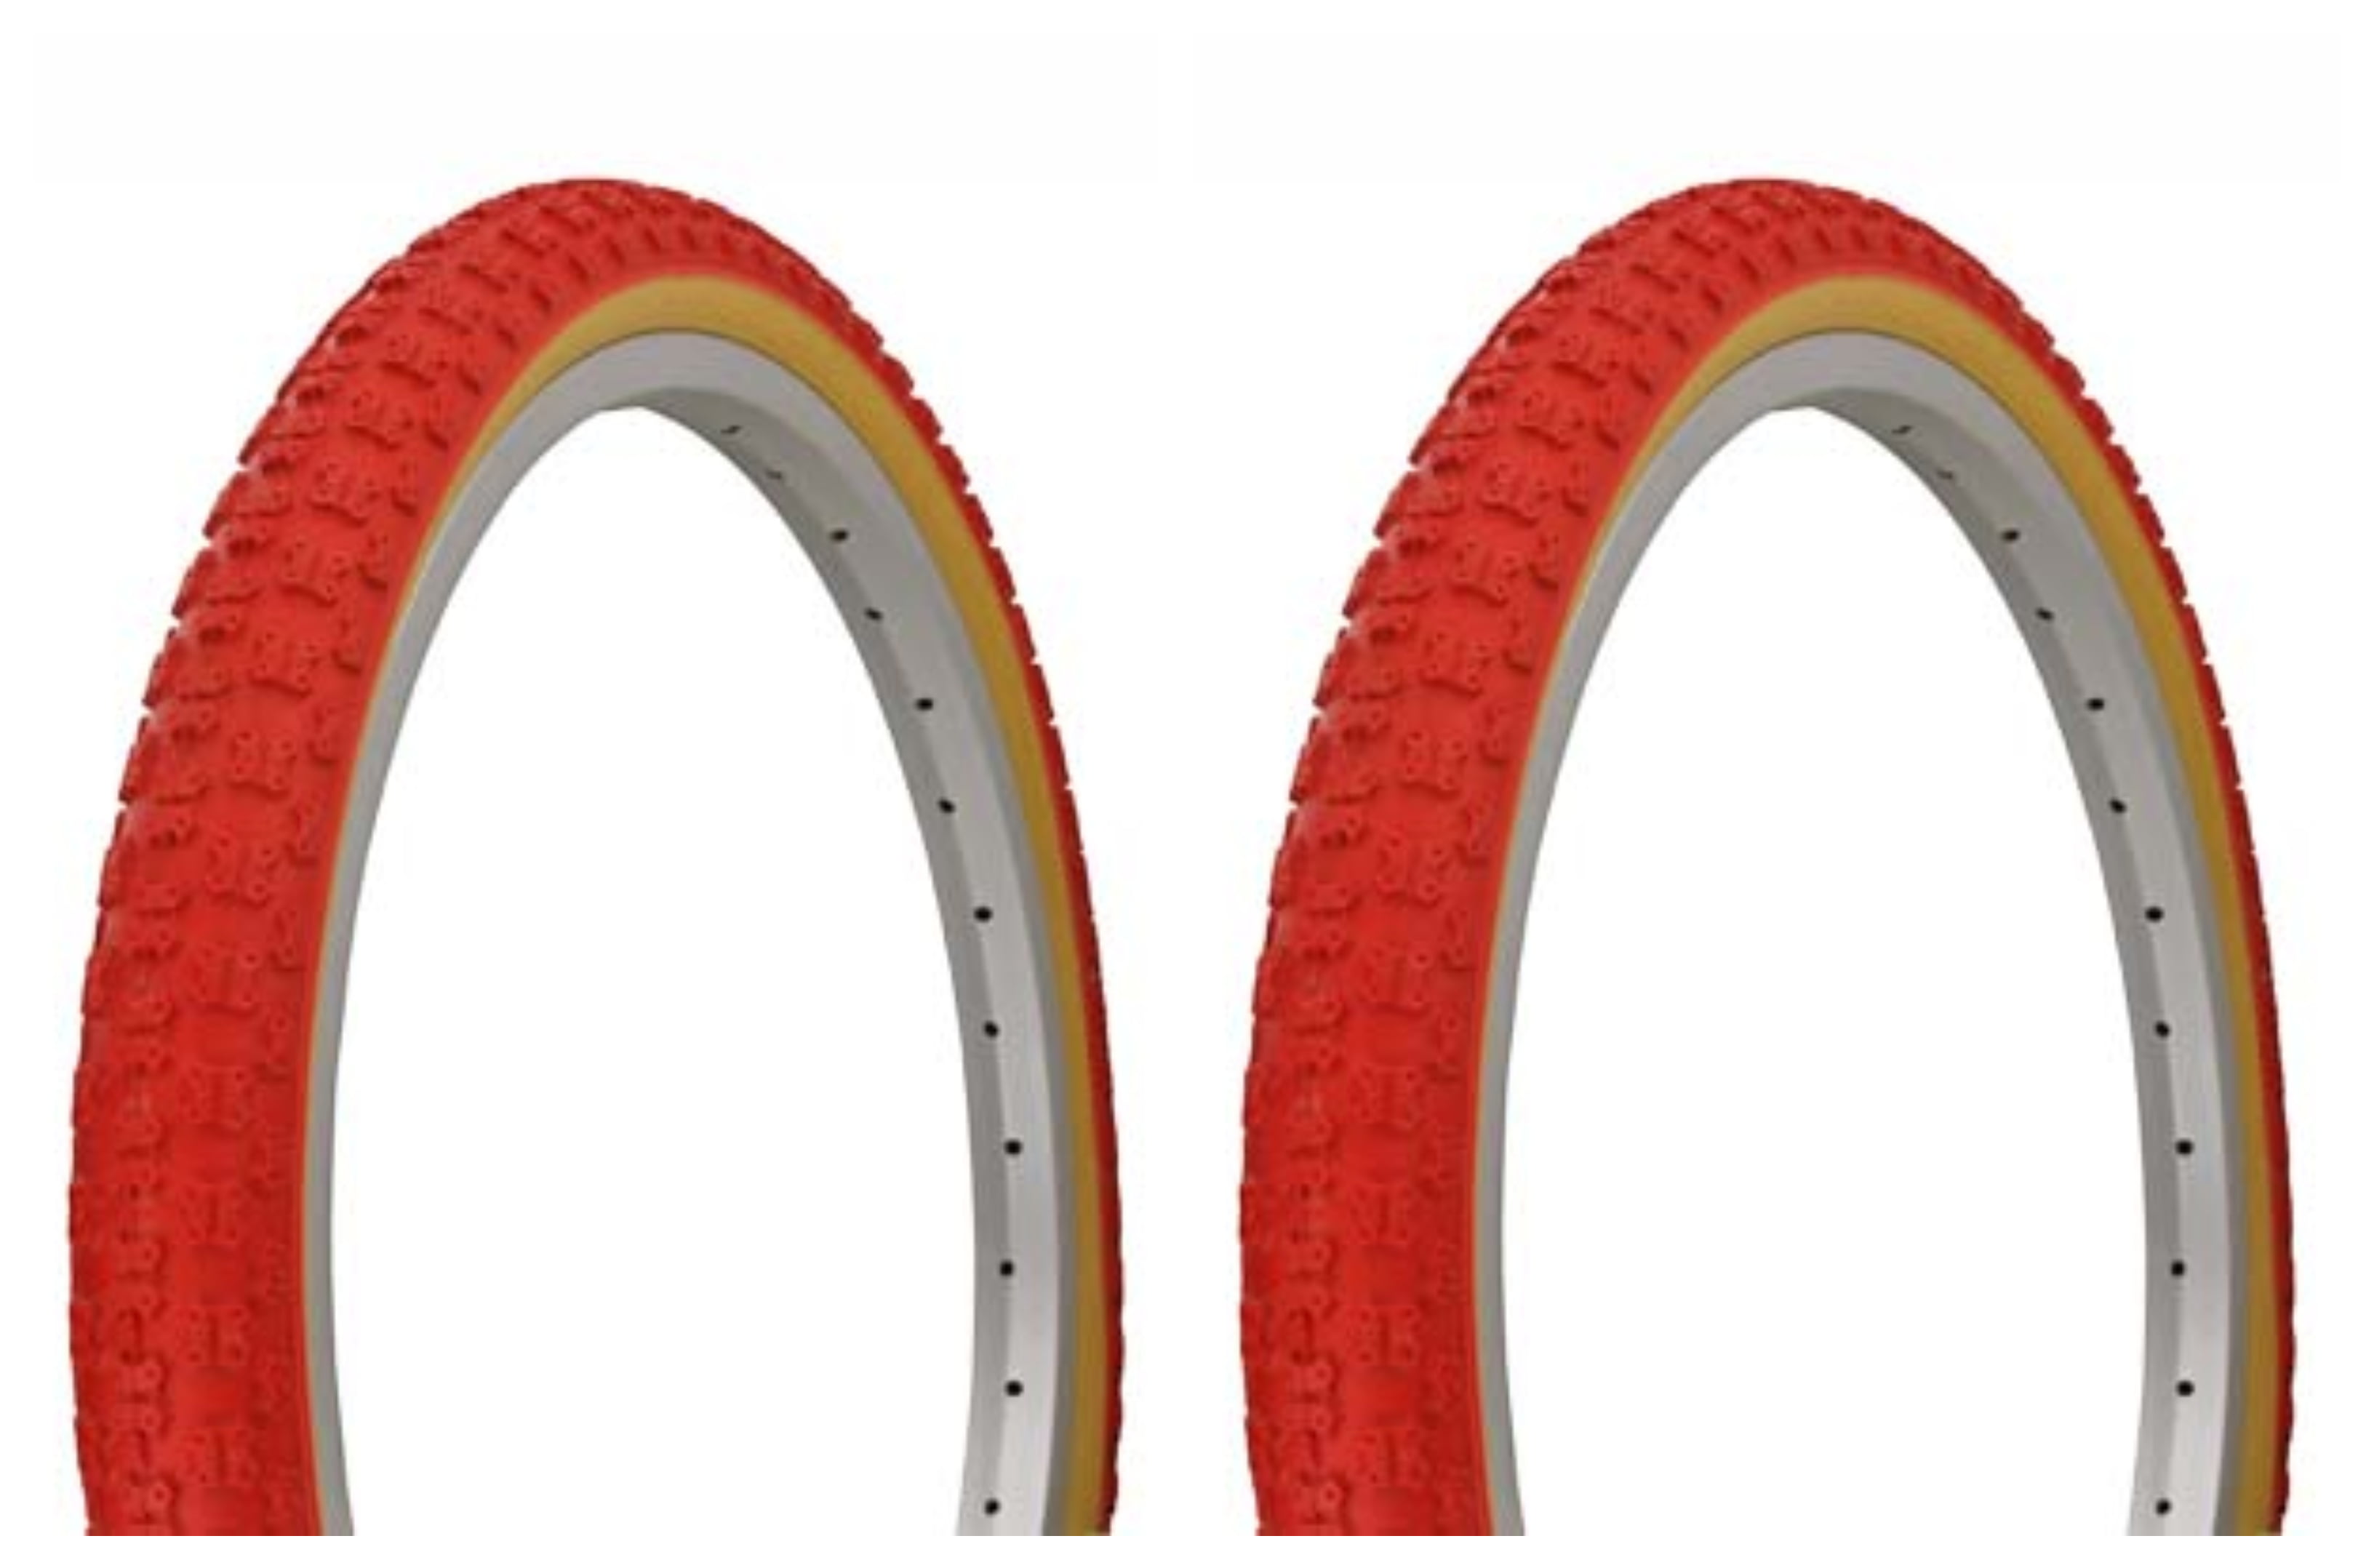 1PAIR Bicycle Bike Tires & Tubes 20" x 2.125" Red/Gum  Side Wall BMX COMP3 